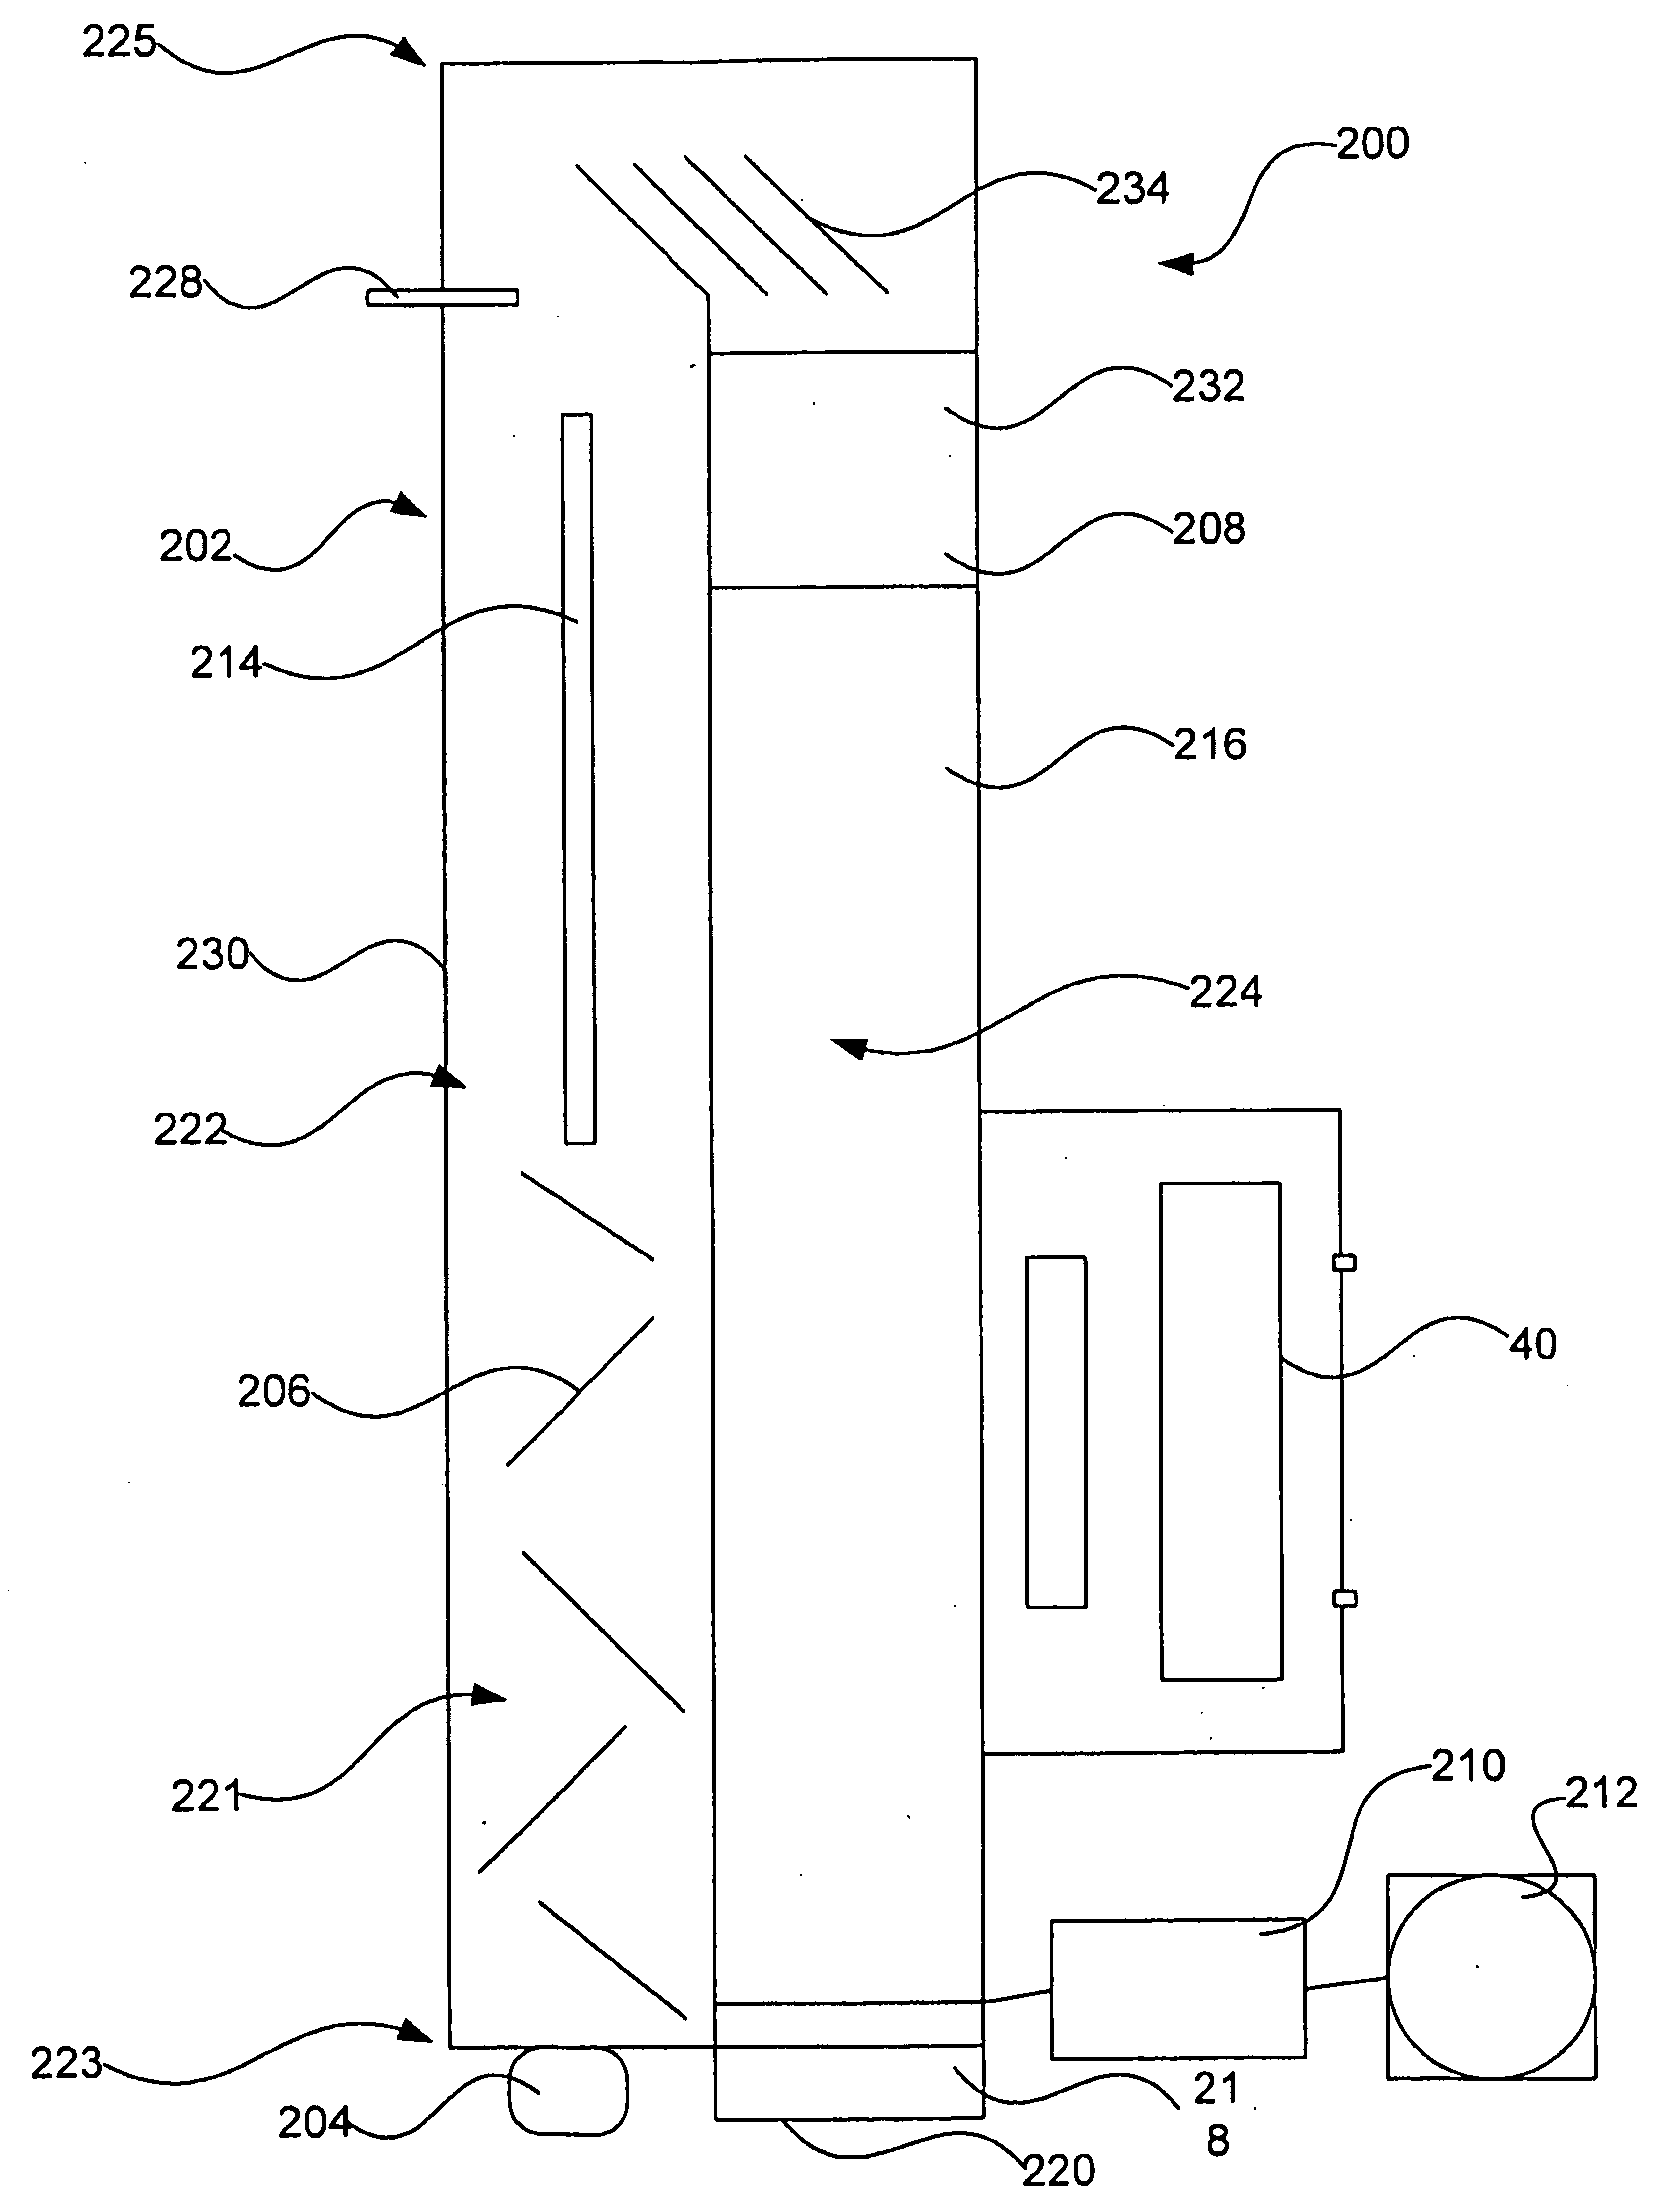 Systems and methods for producing ozonated water on demand